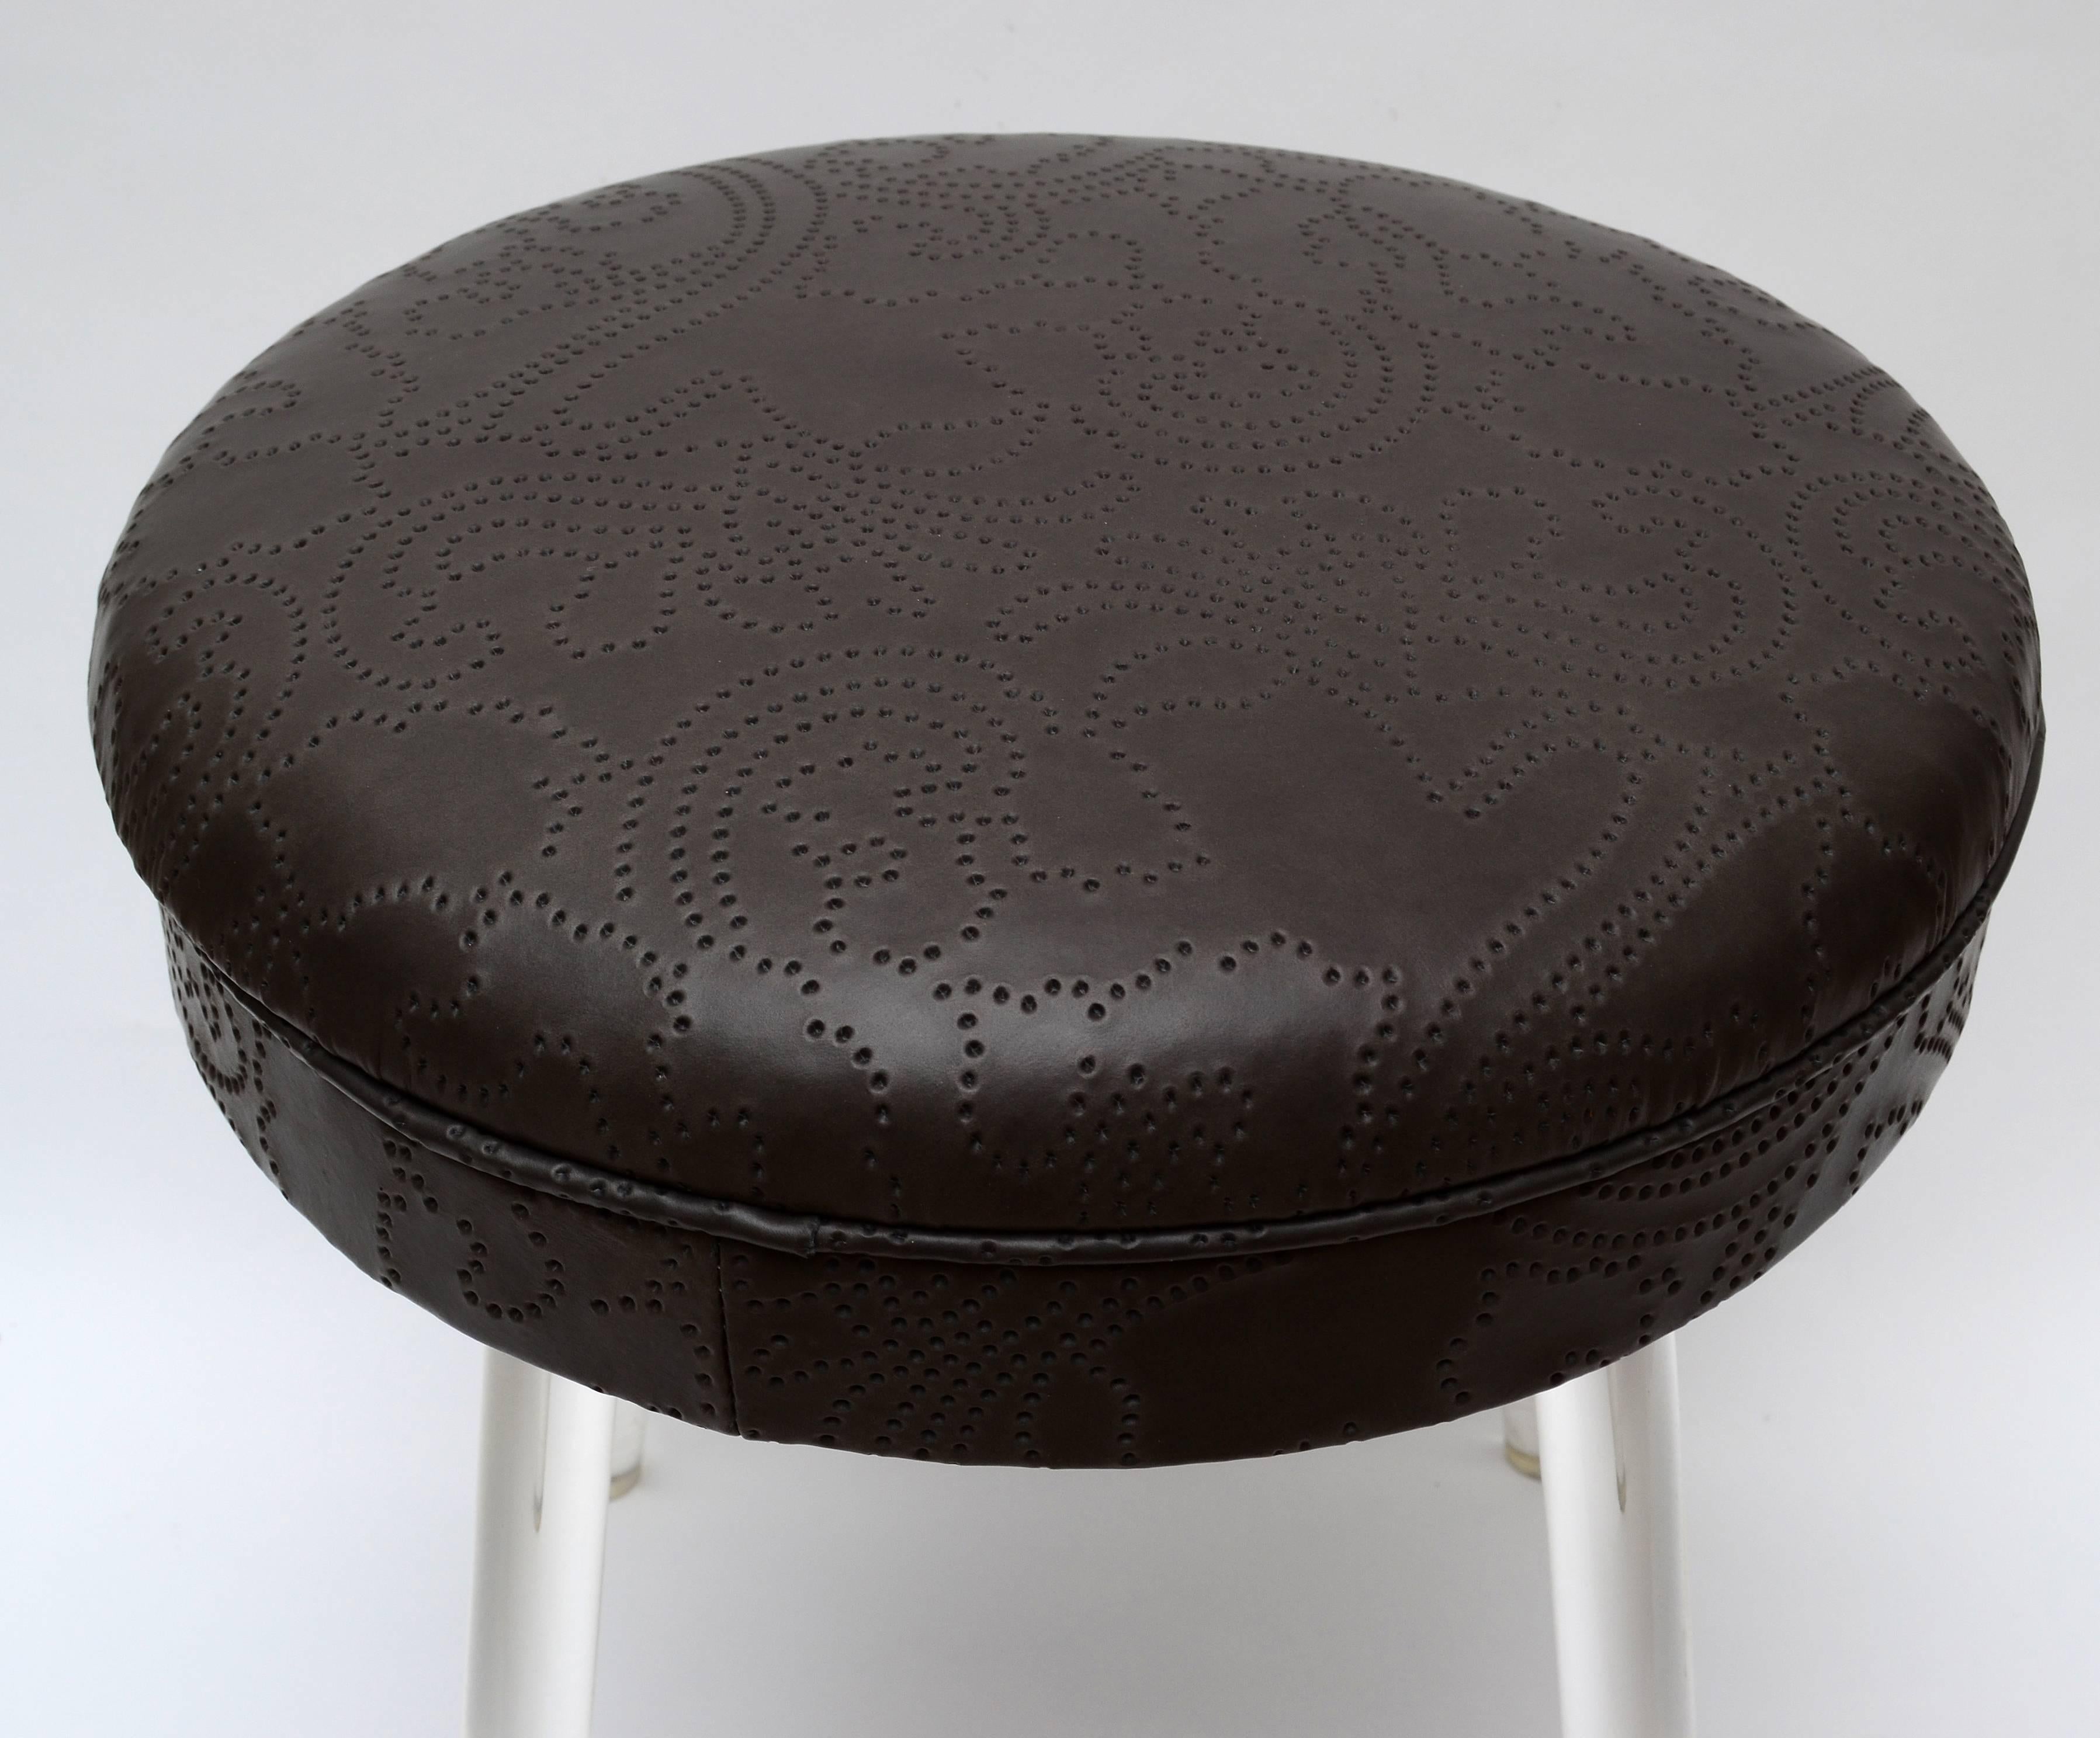 Mid-Century Modern Lucite stool with leather seat and swivel function.
The seat was recently upholstered in this soft leather with unique pattern.
Makers mark: Uni Level.

Measures: Seat height 17.0 inches.